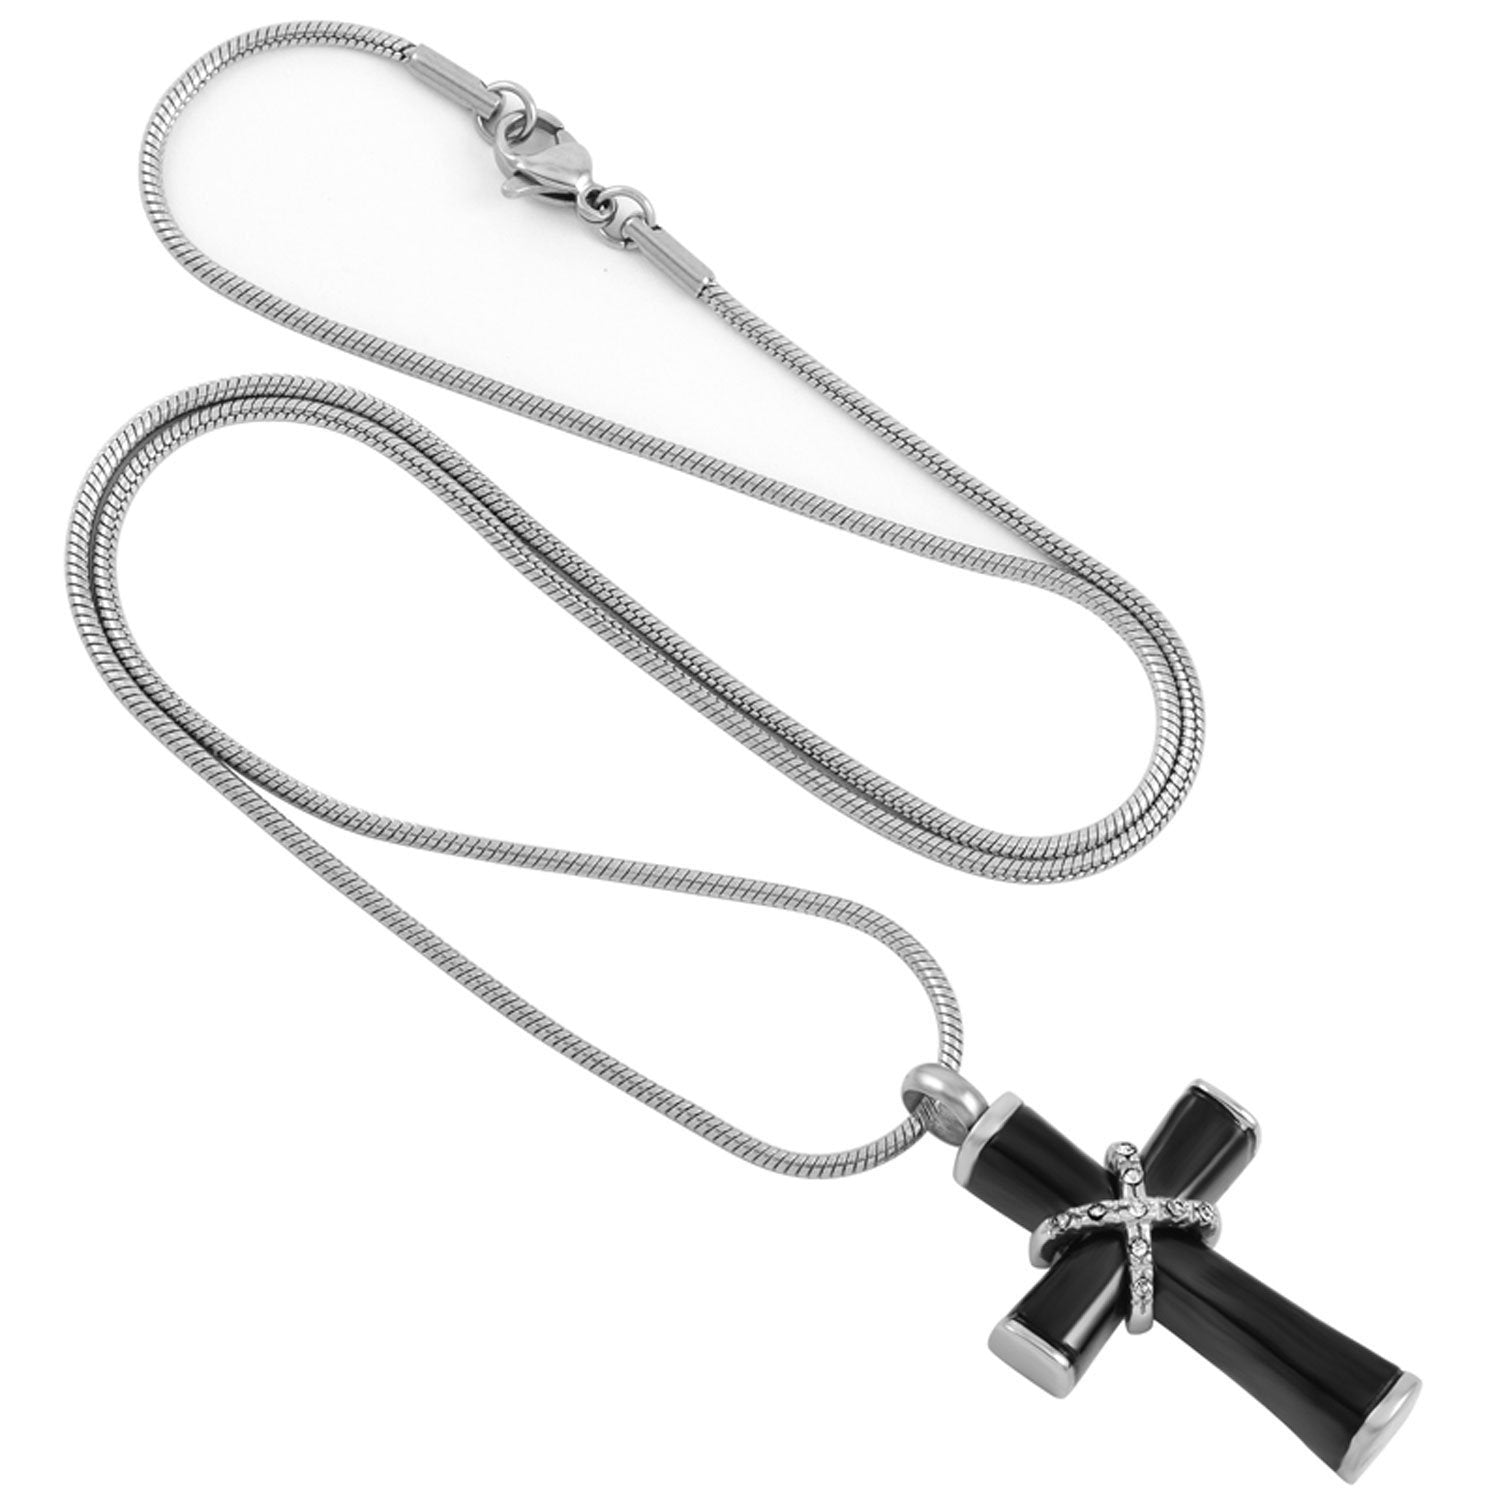 Black and Silver Hawser Cross with Crystals Cremation Jewelry